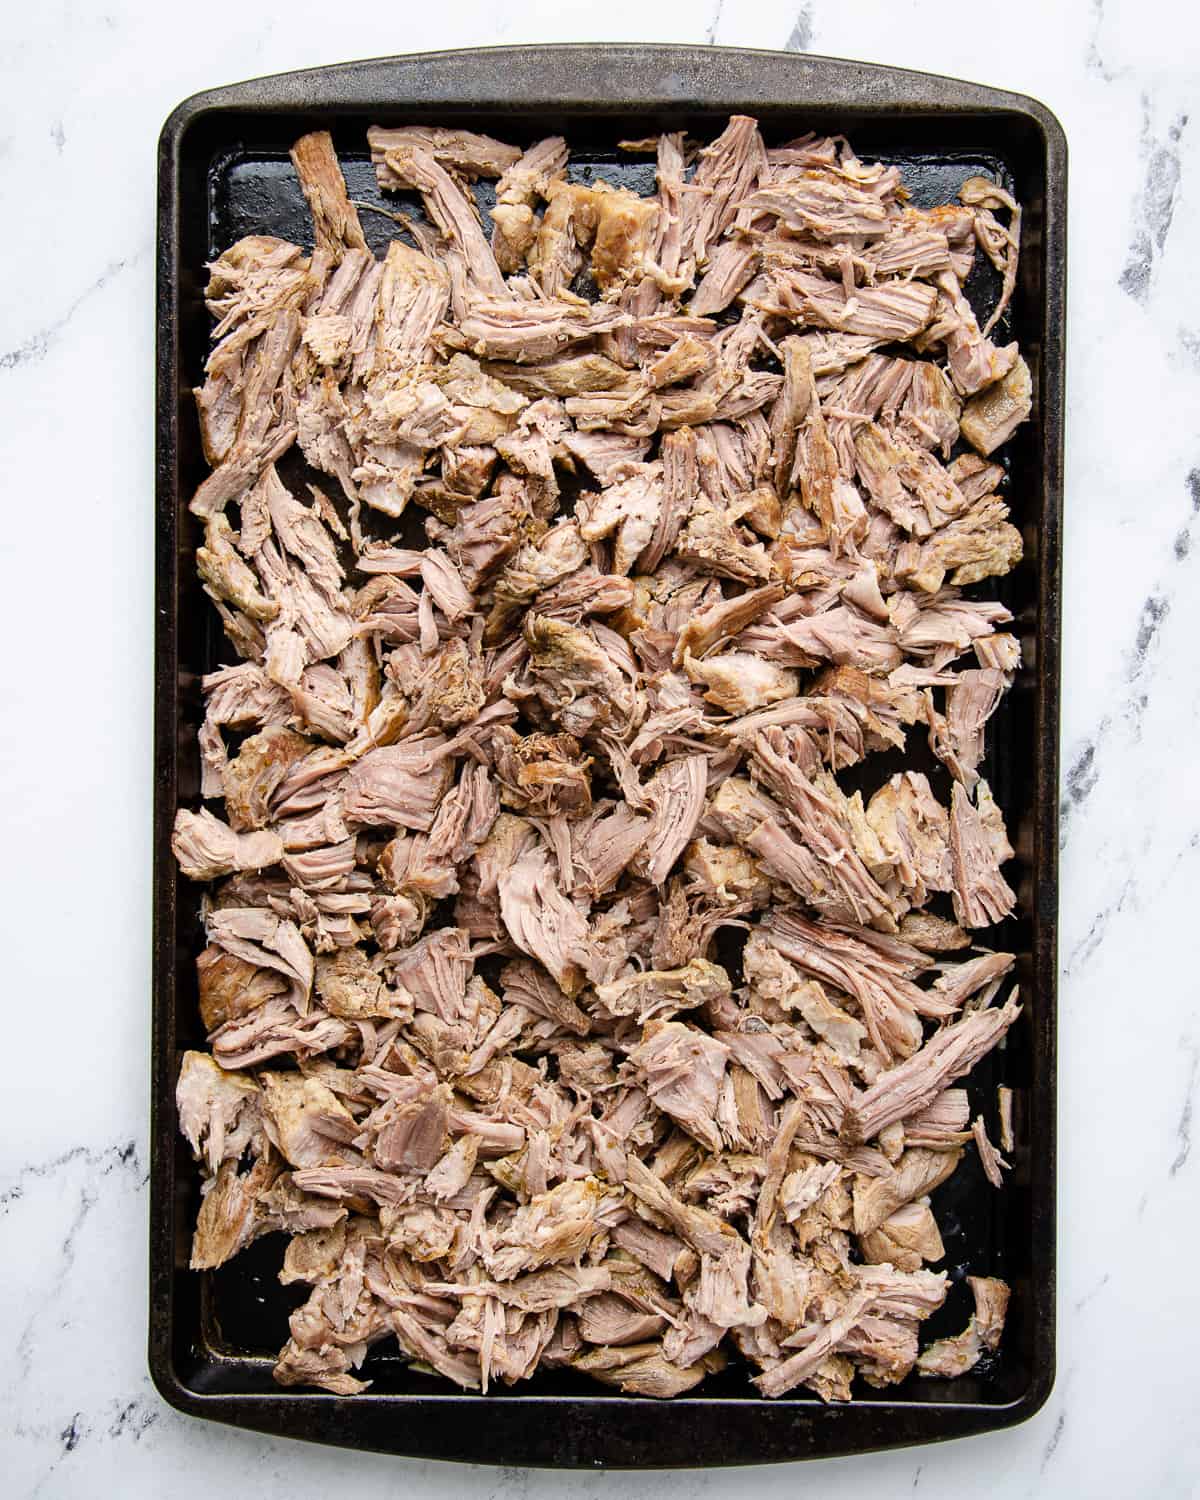 Shredded pork carnitas on a sheet tray ready to be broiled.